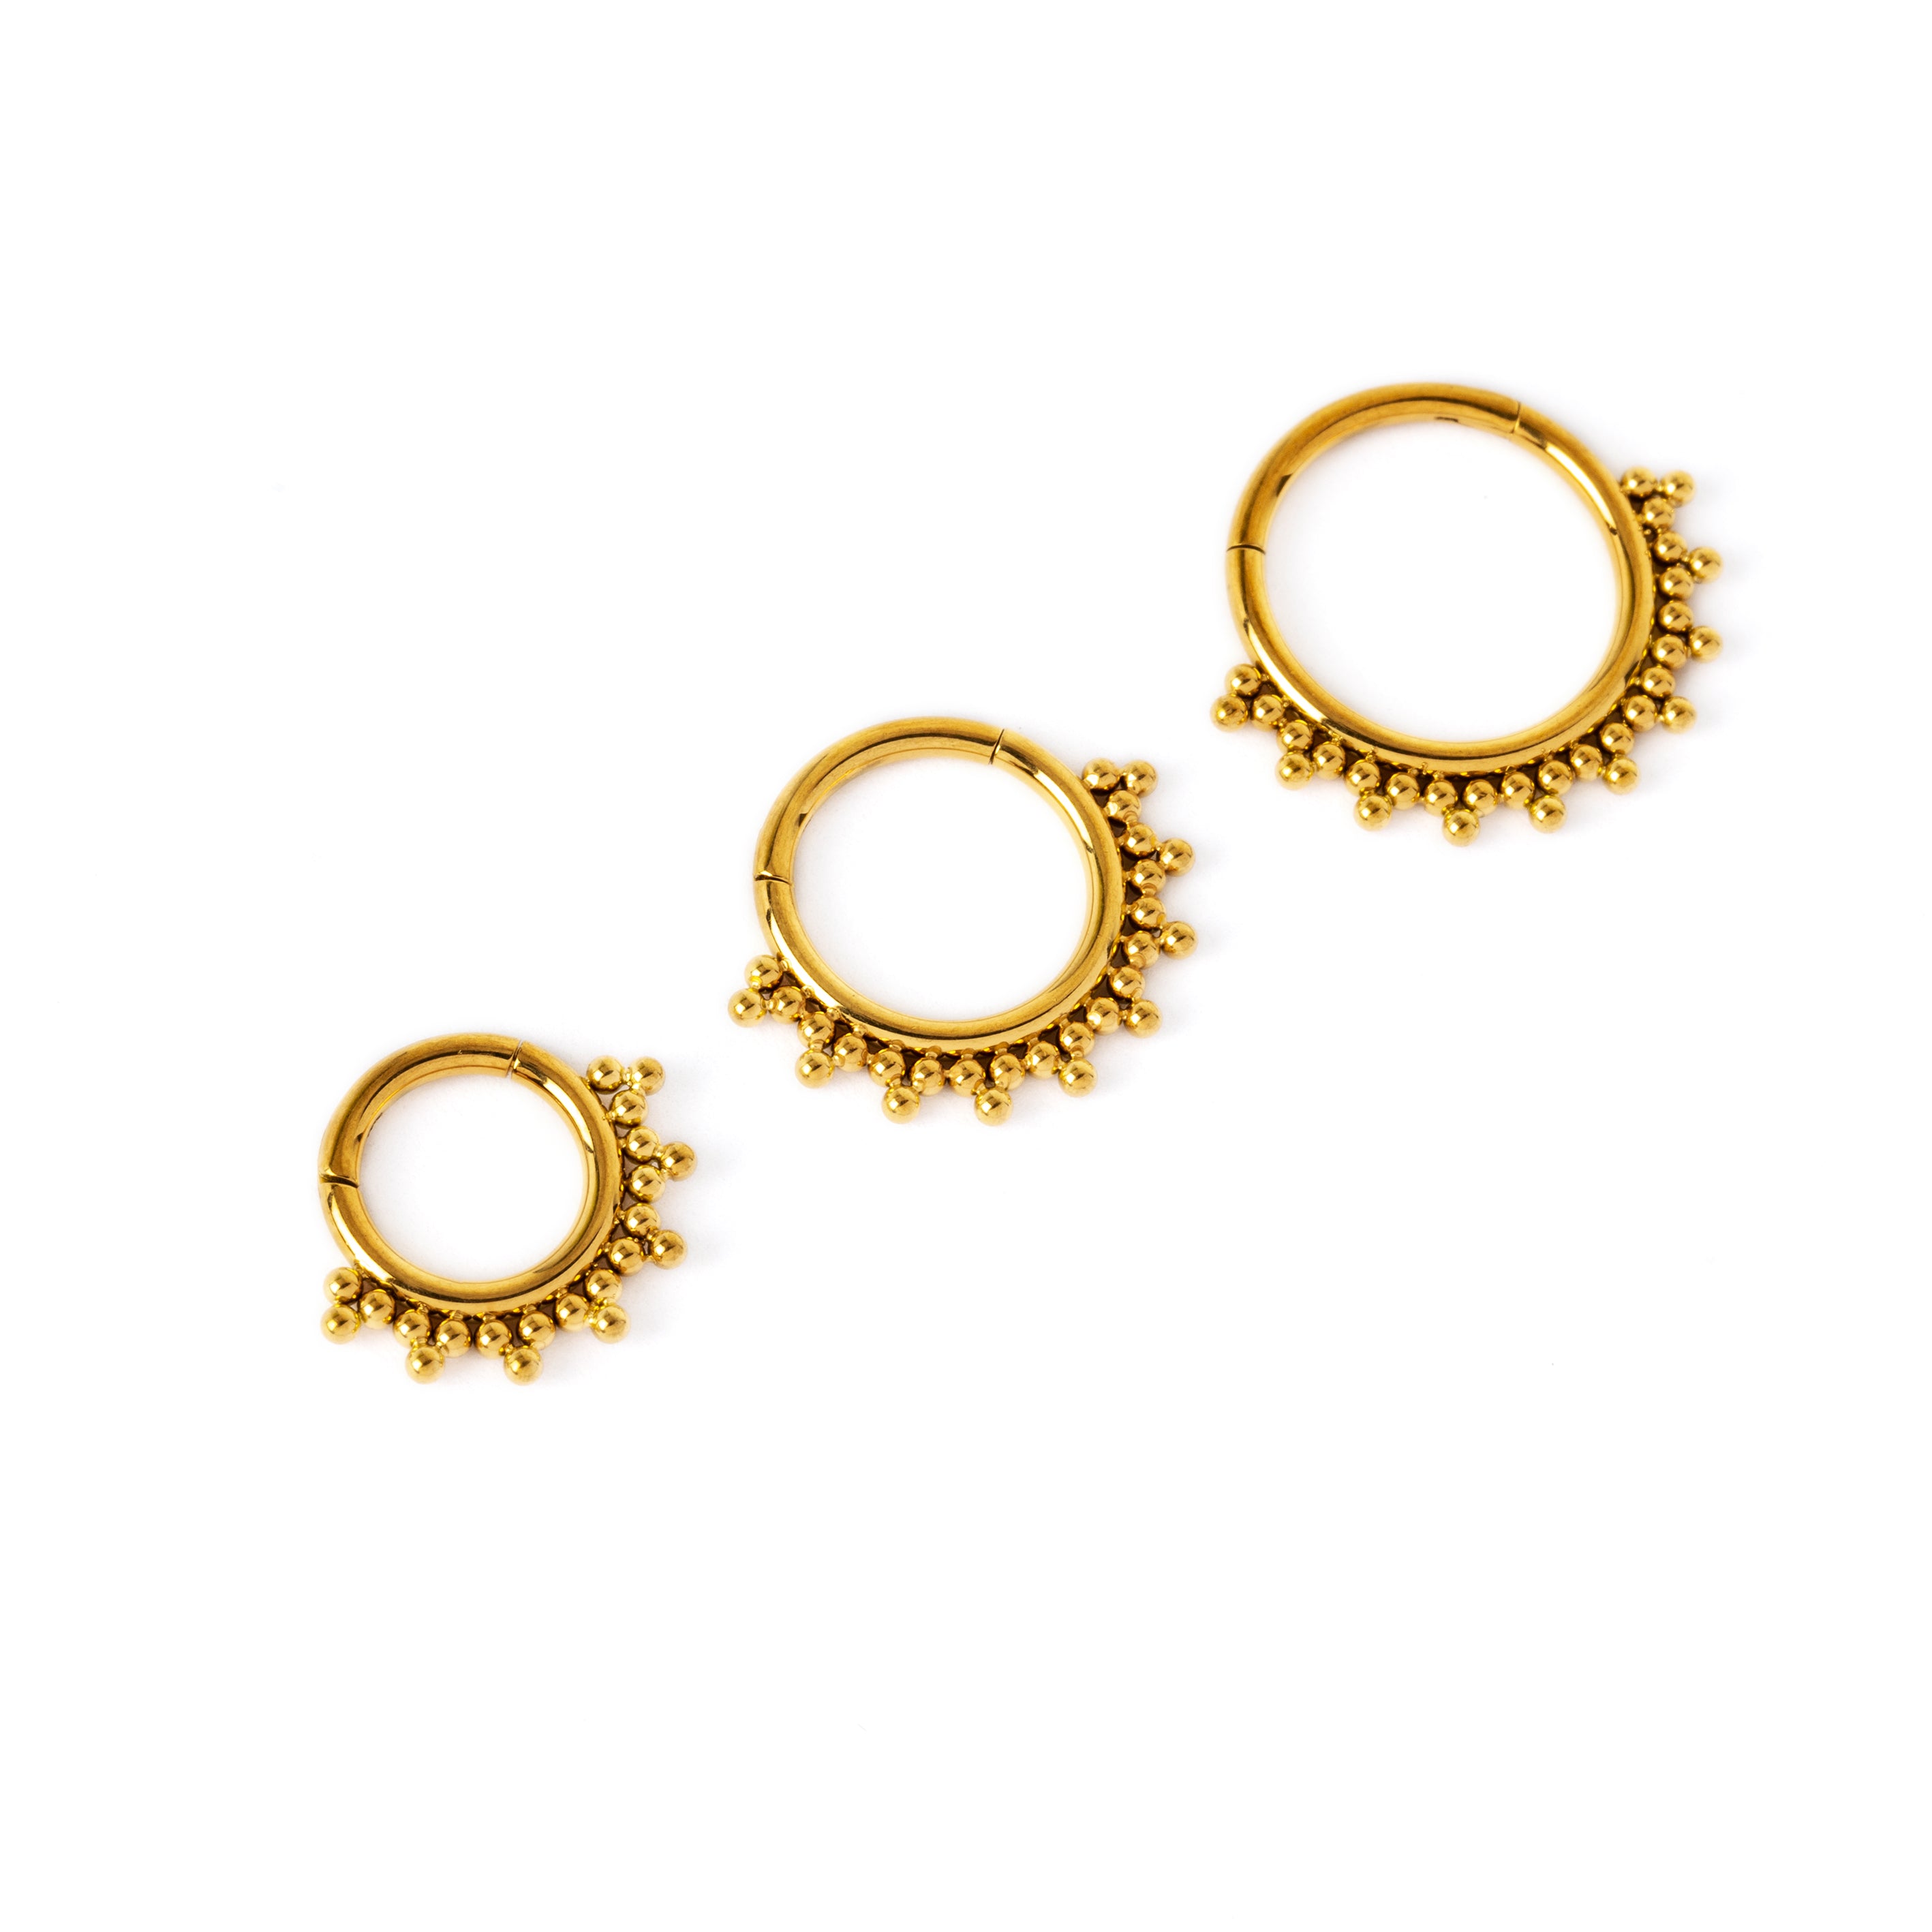 6mm, 8mm, 10mm Sarika gold surgical steel septum clickers side view